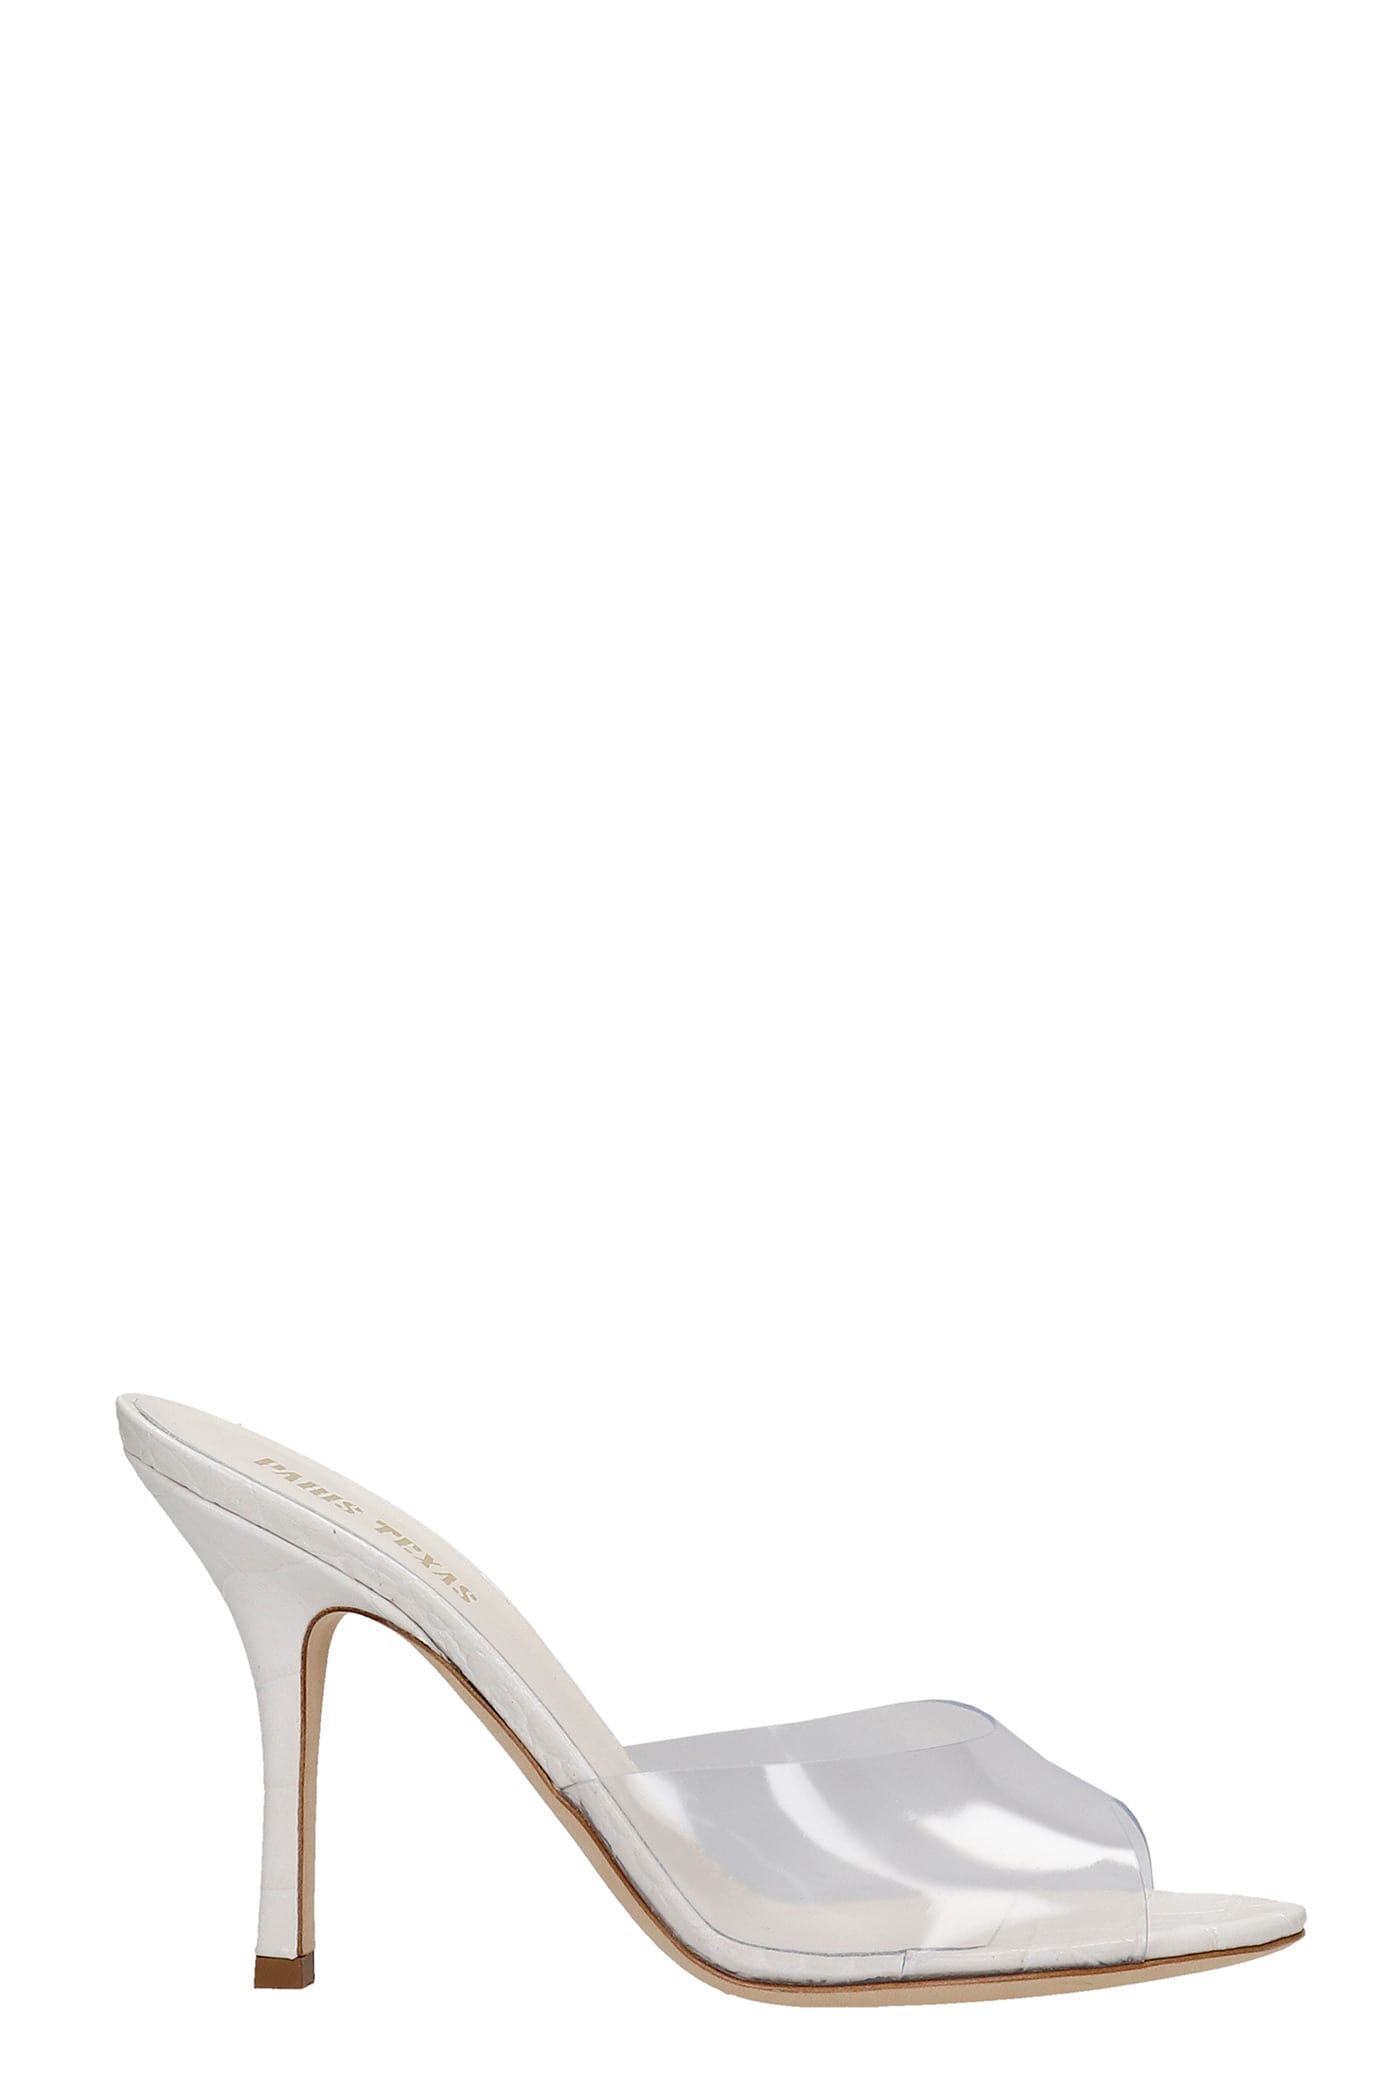 Paris Texas Penelope Sandals In White Leather